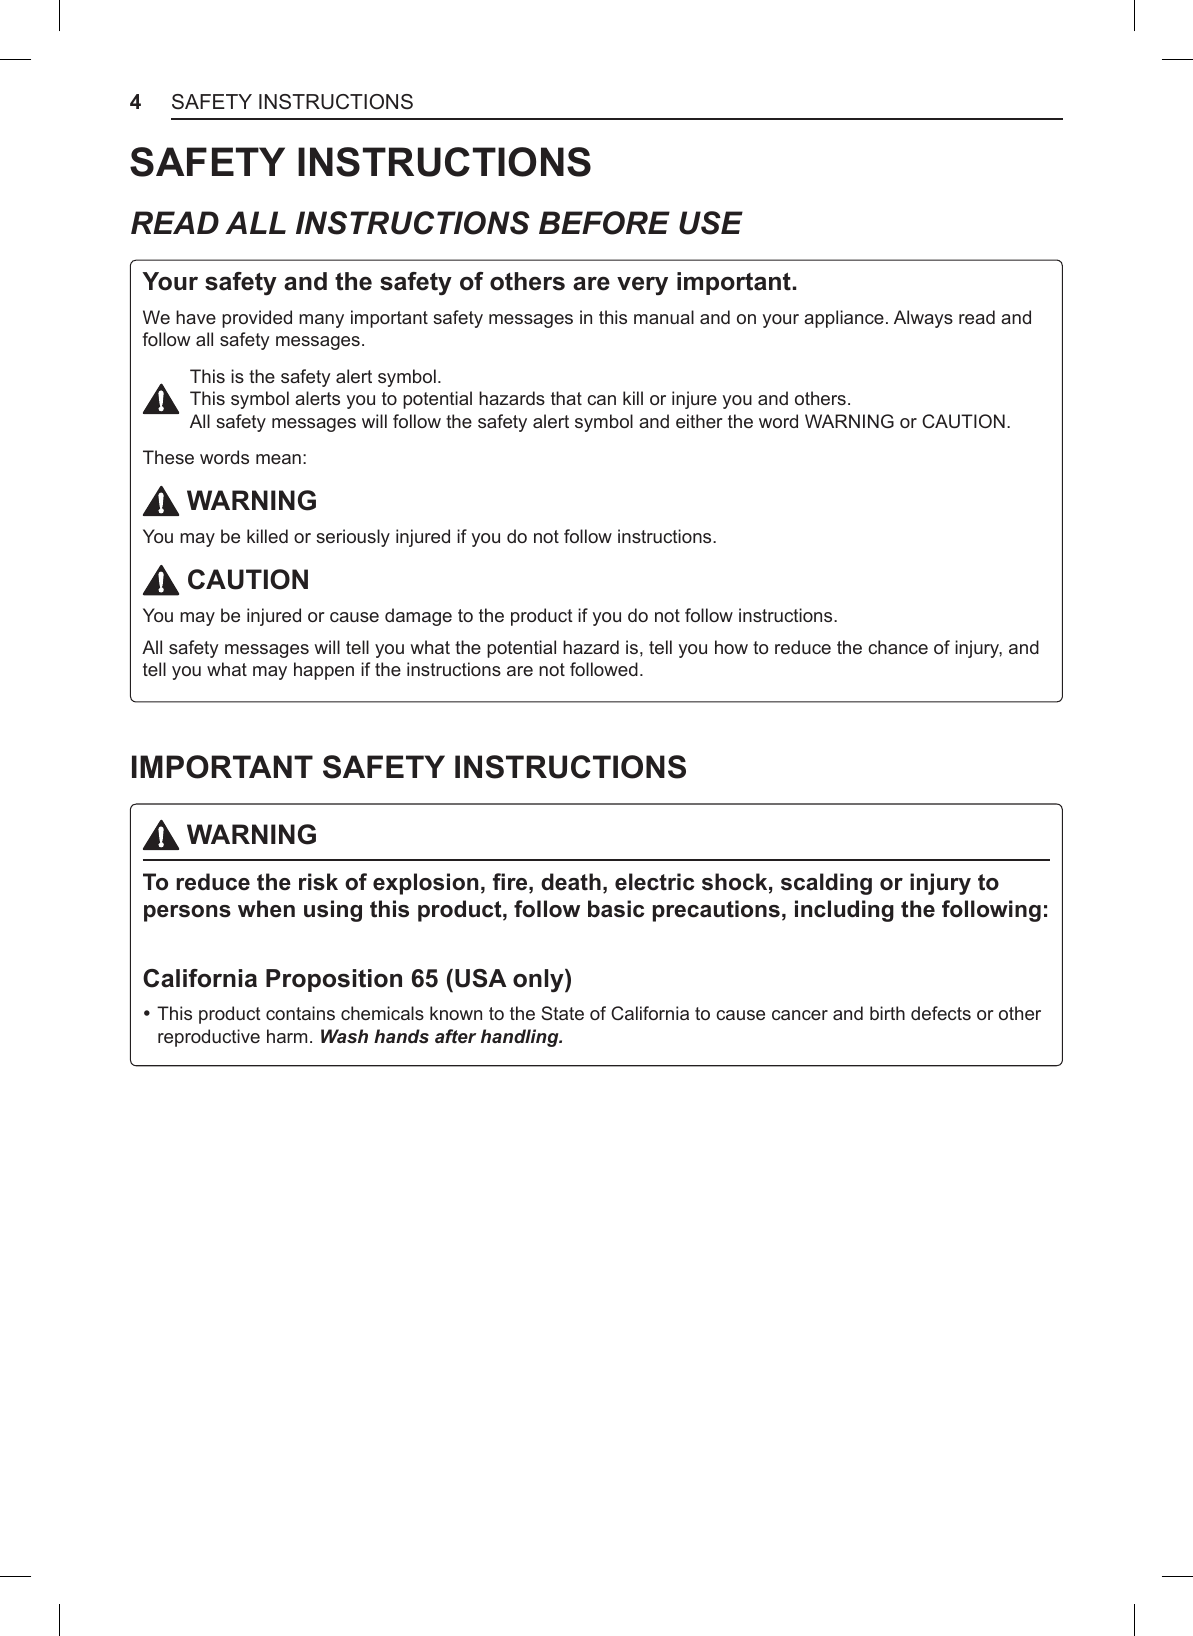 4SAFETY INSTRUCTIONSSAFETY INSTRUCTIONSREAD ALL INSTRUCTIONS BEFORE USEYour safety and the safety of others are very important.We have provided many important safety messages in this manual and on your appliance. Always read and follow all safety messages.This is the safety alert symbol.  This symbol alerts you to potential hazards that can kill or injure you and others.  All safety messages will follow the safety alert symbol and either the word WARNING or CAUTION.These words mean: WARNINGYou may be killed or seriously injured if you do not follow instructions. CAUTIONYou may be injured or cause damage to the product if you do not follow instructions.All safety messages will tell you what the potential hazard is, tell you how to reduce the chance of injury, and tell you what may happen if the instructions are not followed.IMPORTANT SAFETY INSTRUCTIONS WARNINGTo reduce the risk of explosion, re, death, electric shock, scalding or injury to persons when using this product, follow basic precautions, including the following:California Proposition 65 (USA only) •This product contains chemicals known to the State of California to cause cancer and birth defects or other reproductive harm. Wash hands after handling.